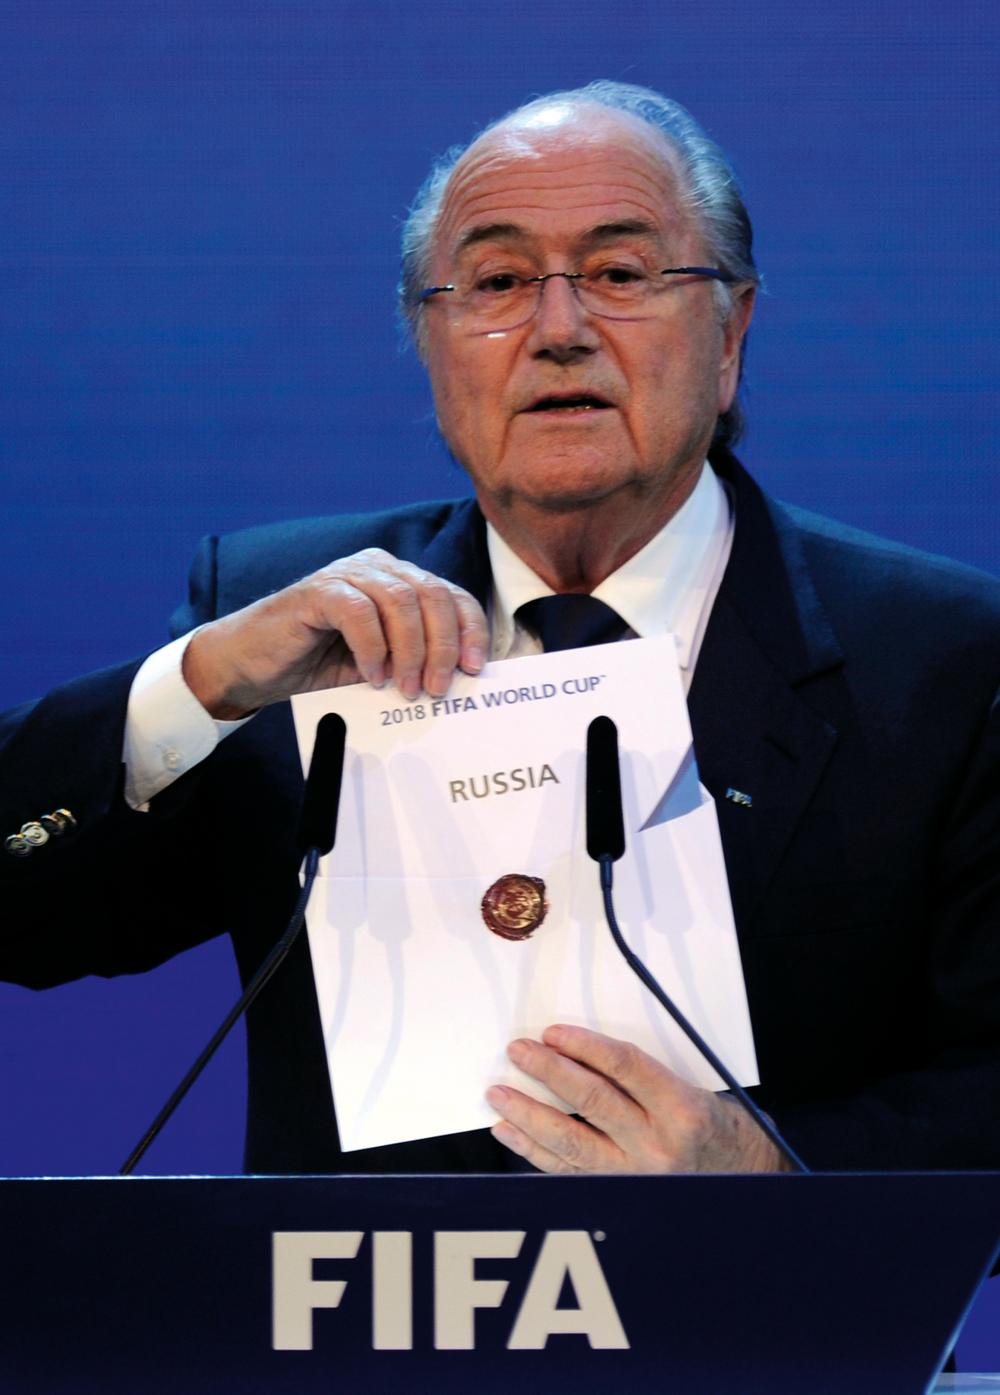 FIFA president Sepp Blatter announces Russia as host of the FIFA 2018 World Cup